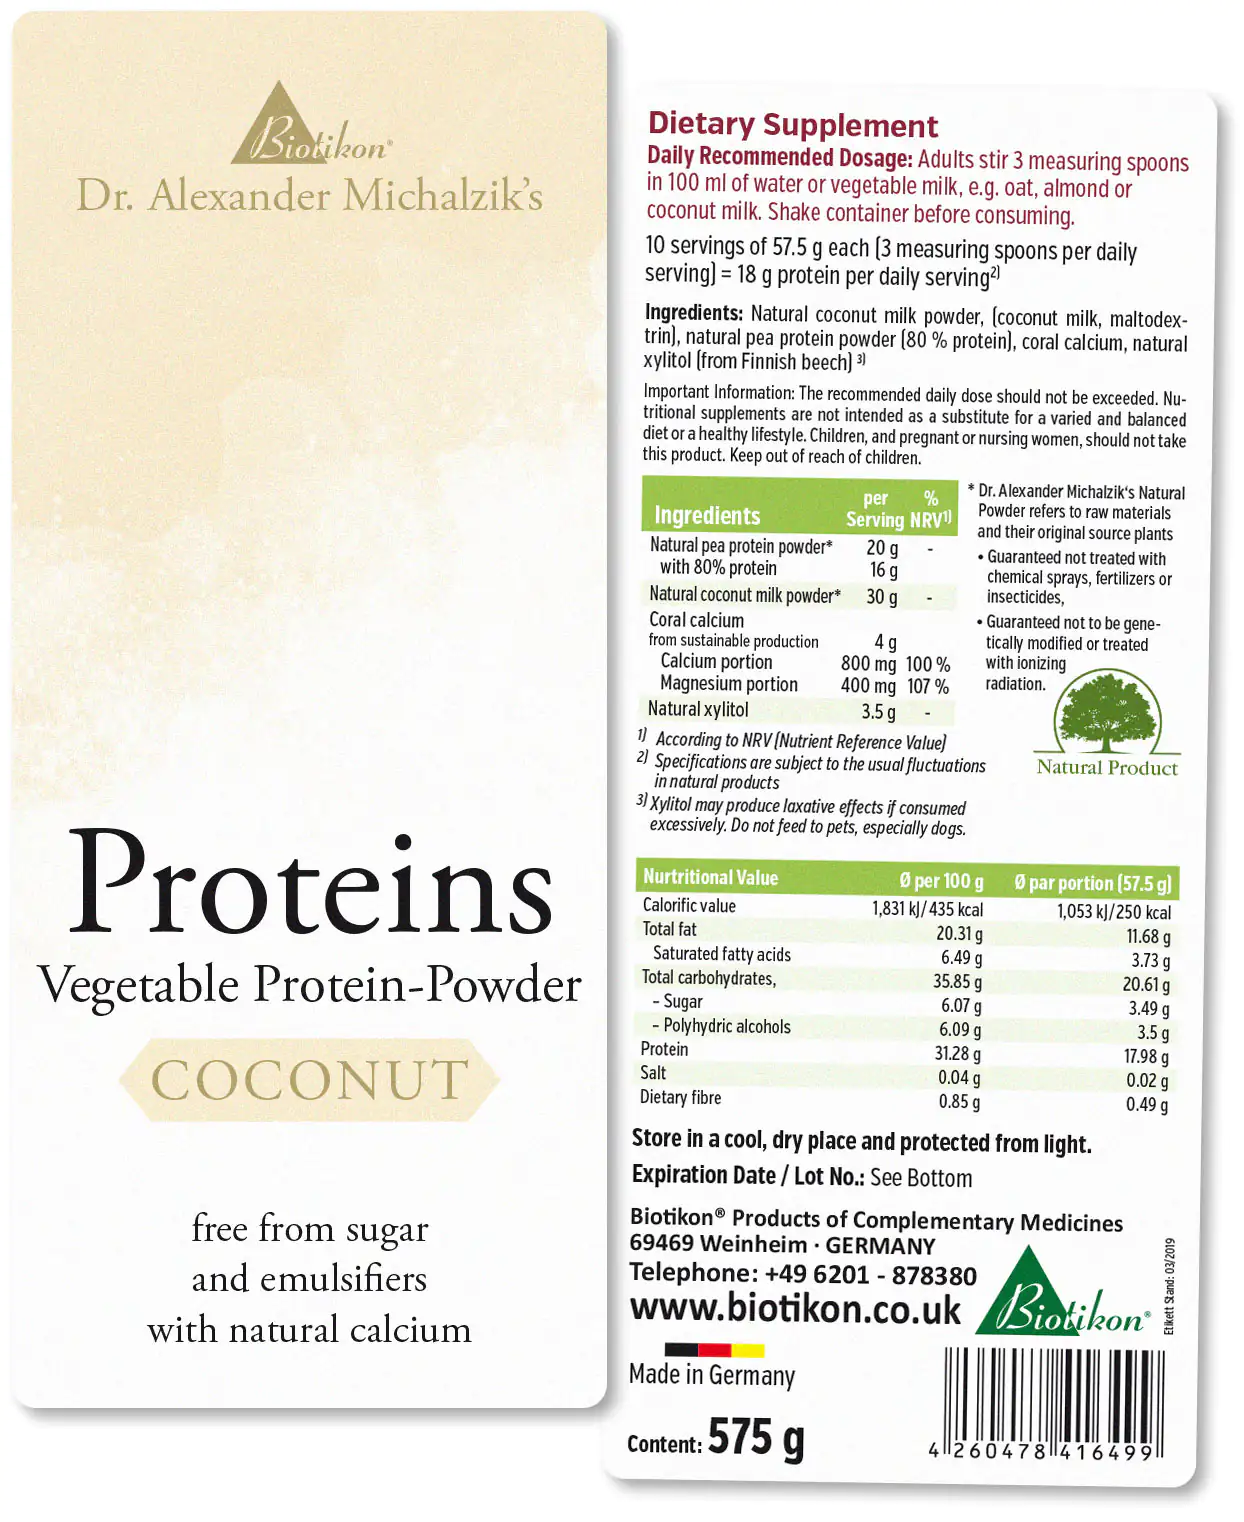 Protein - 3 pack, 2x Aronia + Cocoa